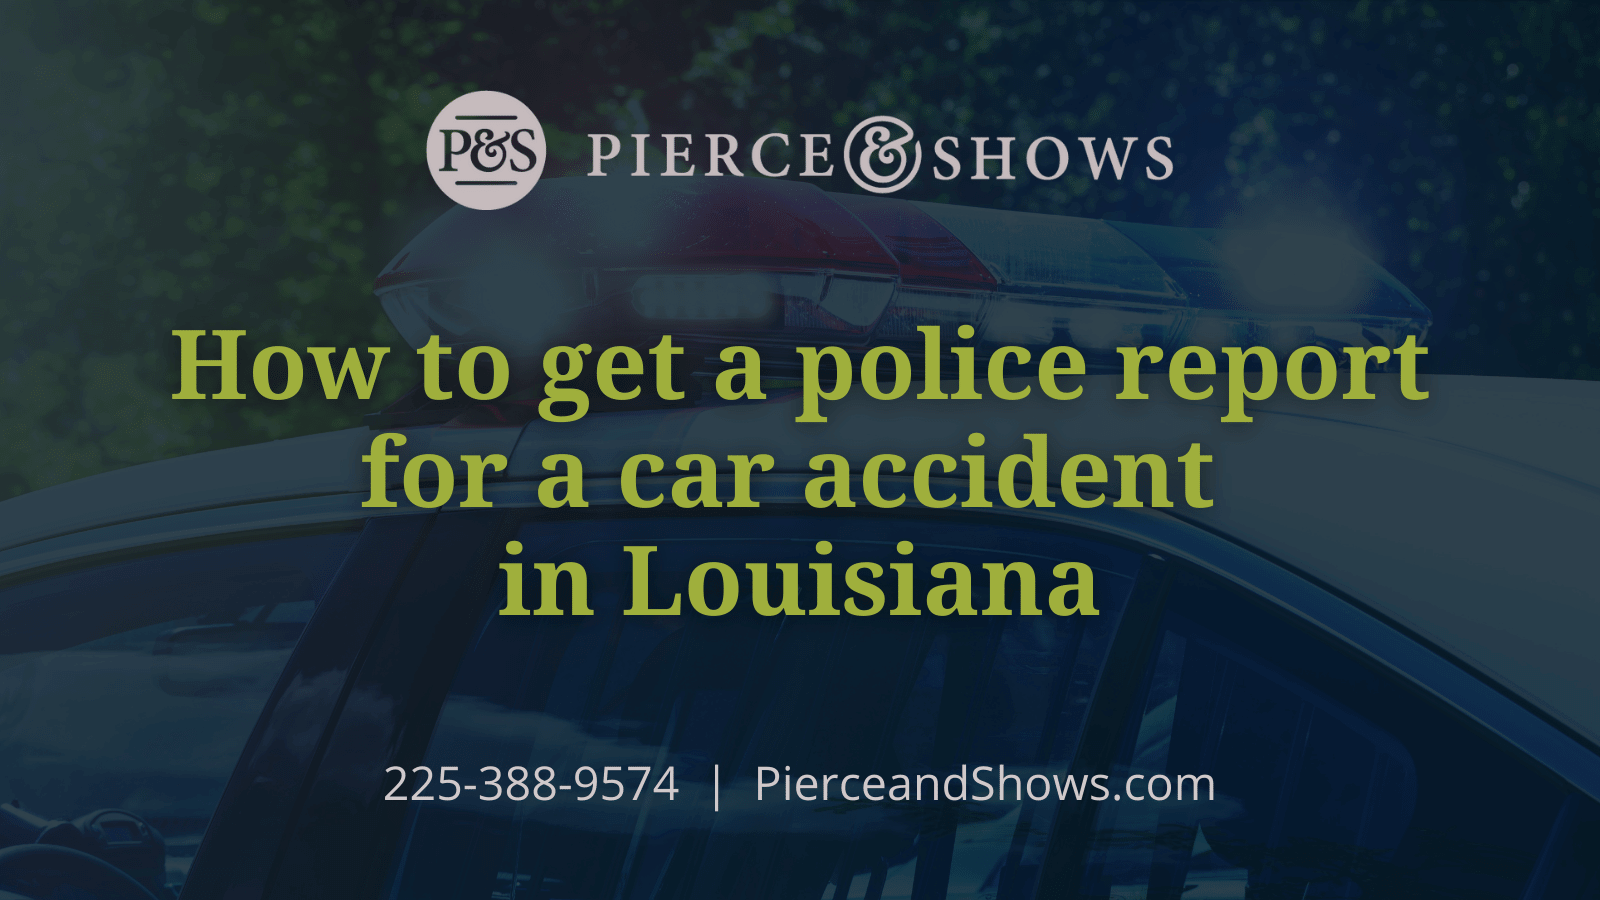 How to get a police report for a car accident in Louisiana - Baton Rouge Louisiana injury attorney Pierce & Shows